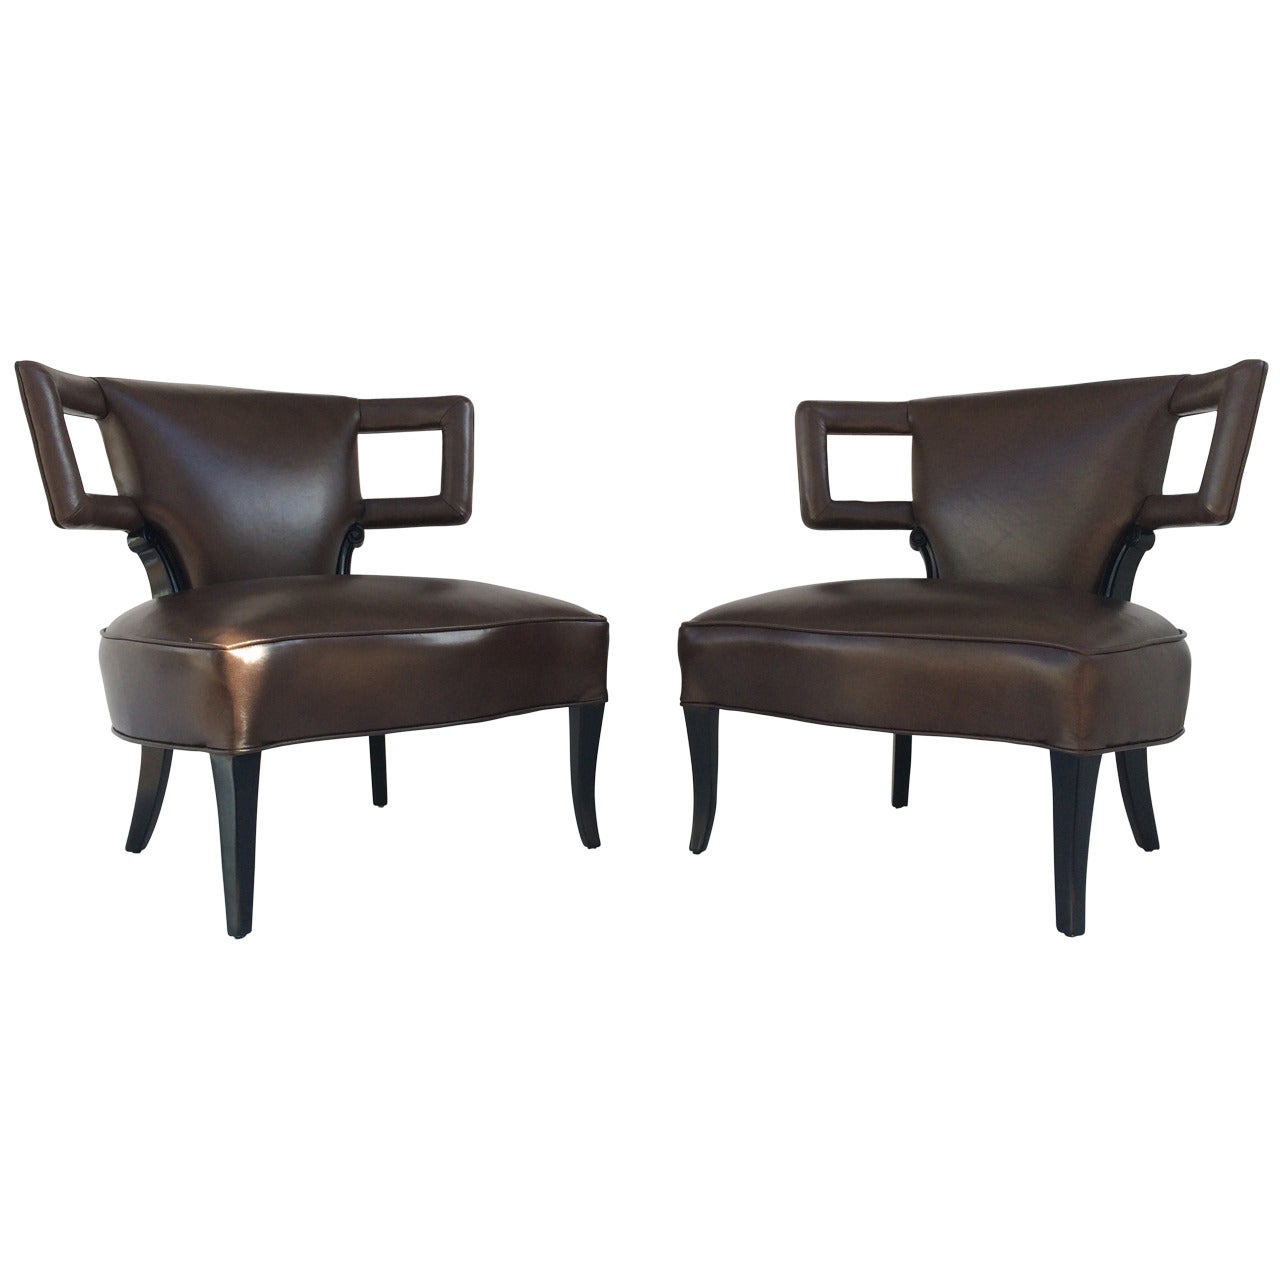 Gorgeous Pair of Sculptural Rich Brown Leather Grosfeld House Chairs